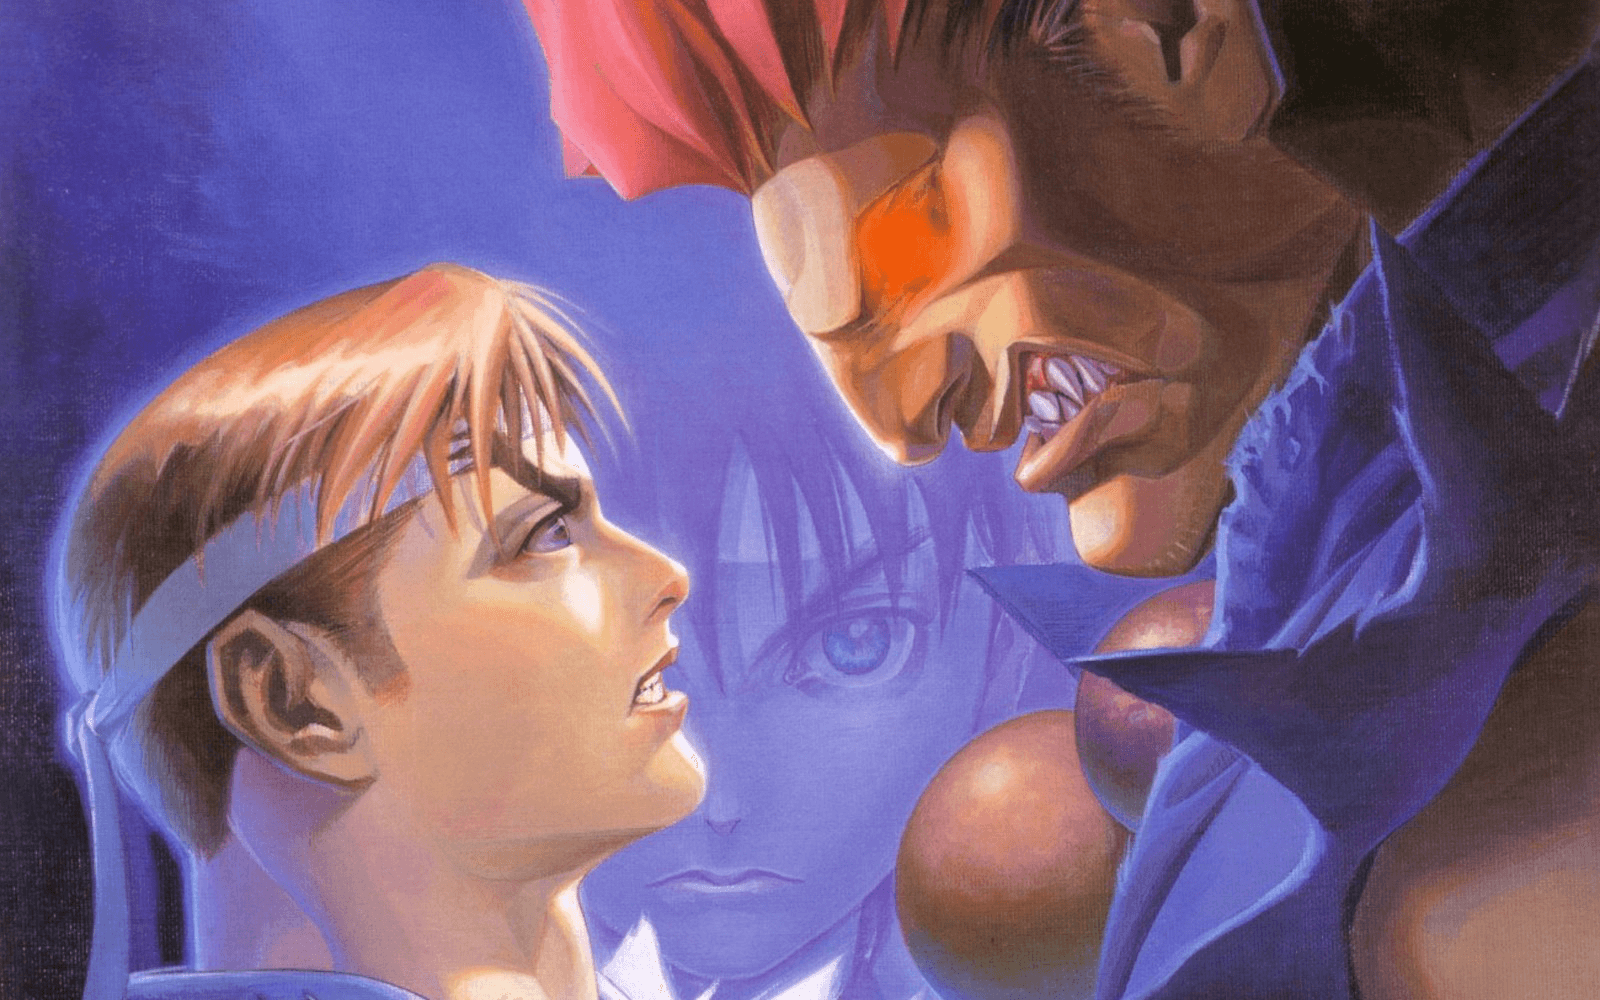 Street Fighter Zero (Alpha) series - The Cane and Rinse podcast